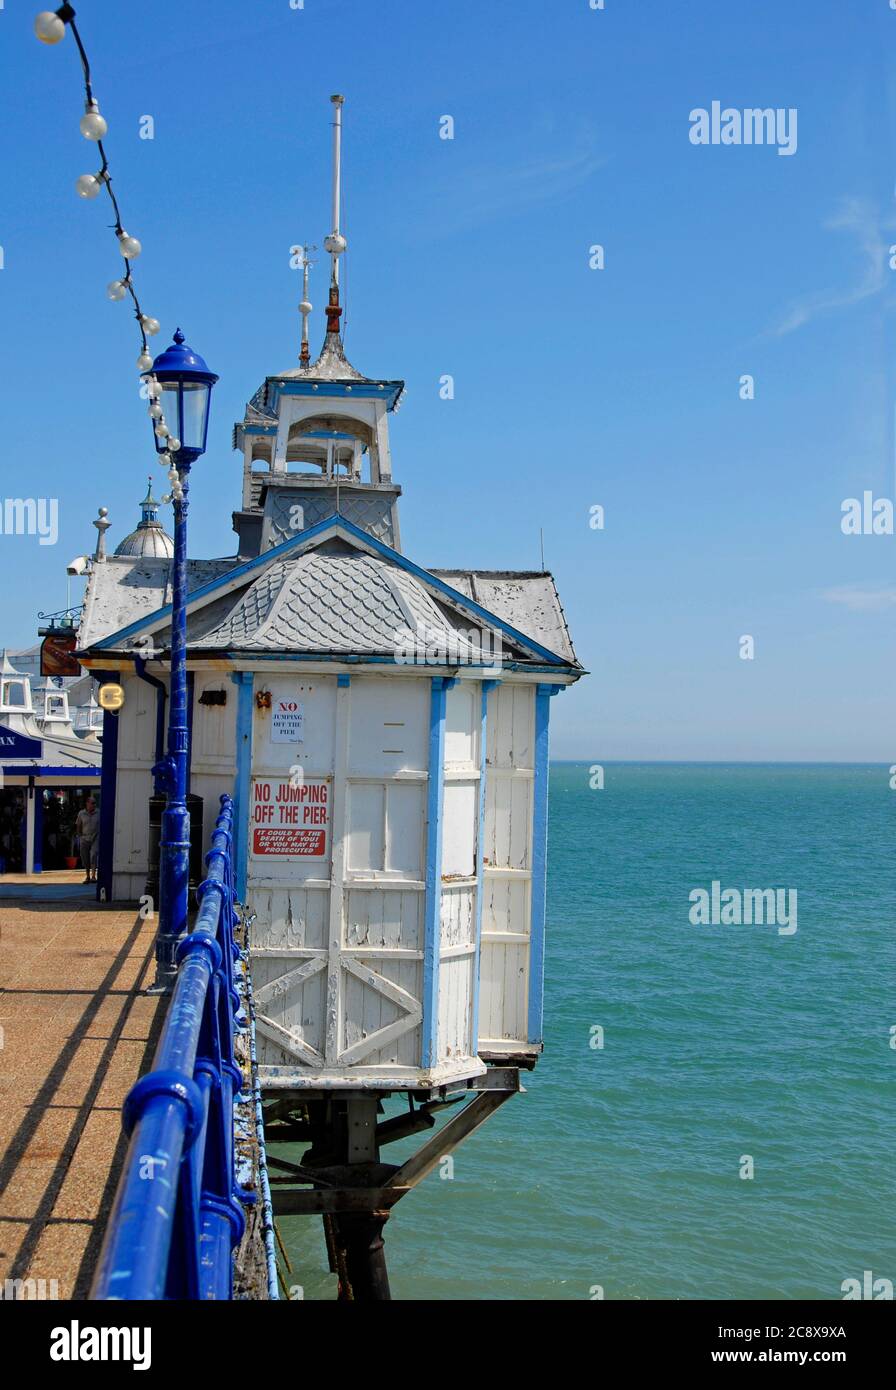 Notice on the side of the pier, Eastbourne pier, East Suusex, England ordering 'No jumping off the pier' Stock Photo